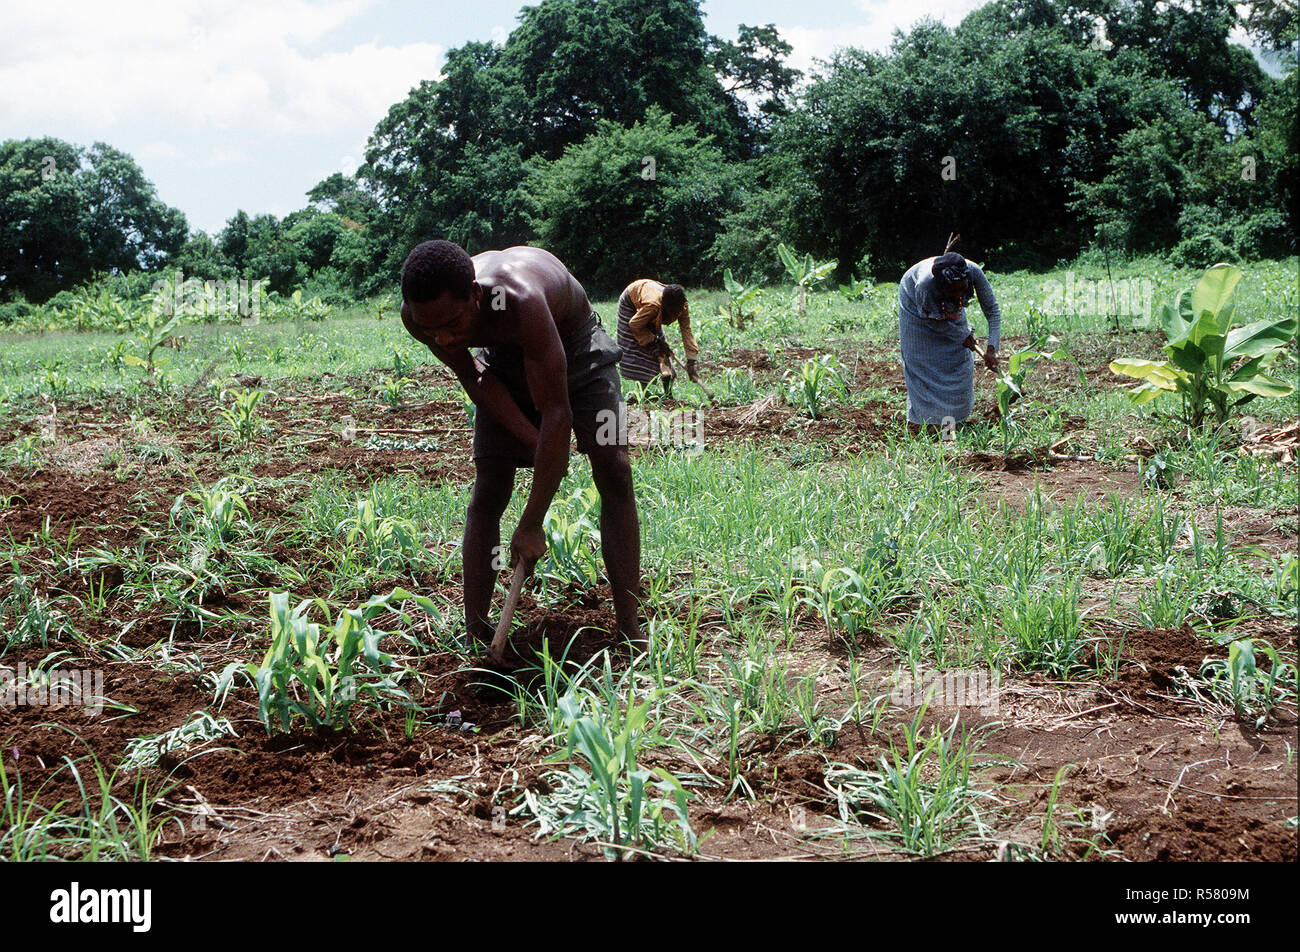 1993 - Somali farmers working in the fields in Kismayo, Somalia while U.S. Forces were in Somalia for Operation Continue Hope. Stock Photo